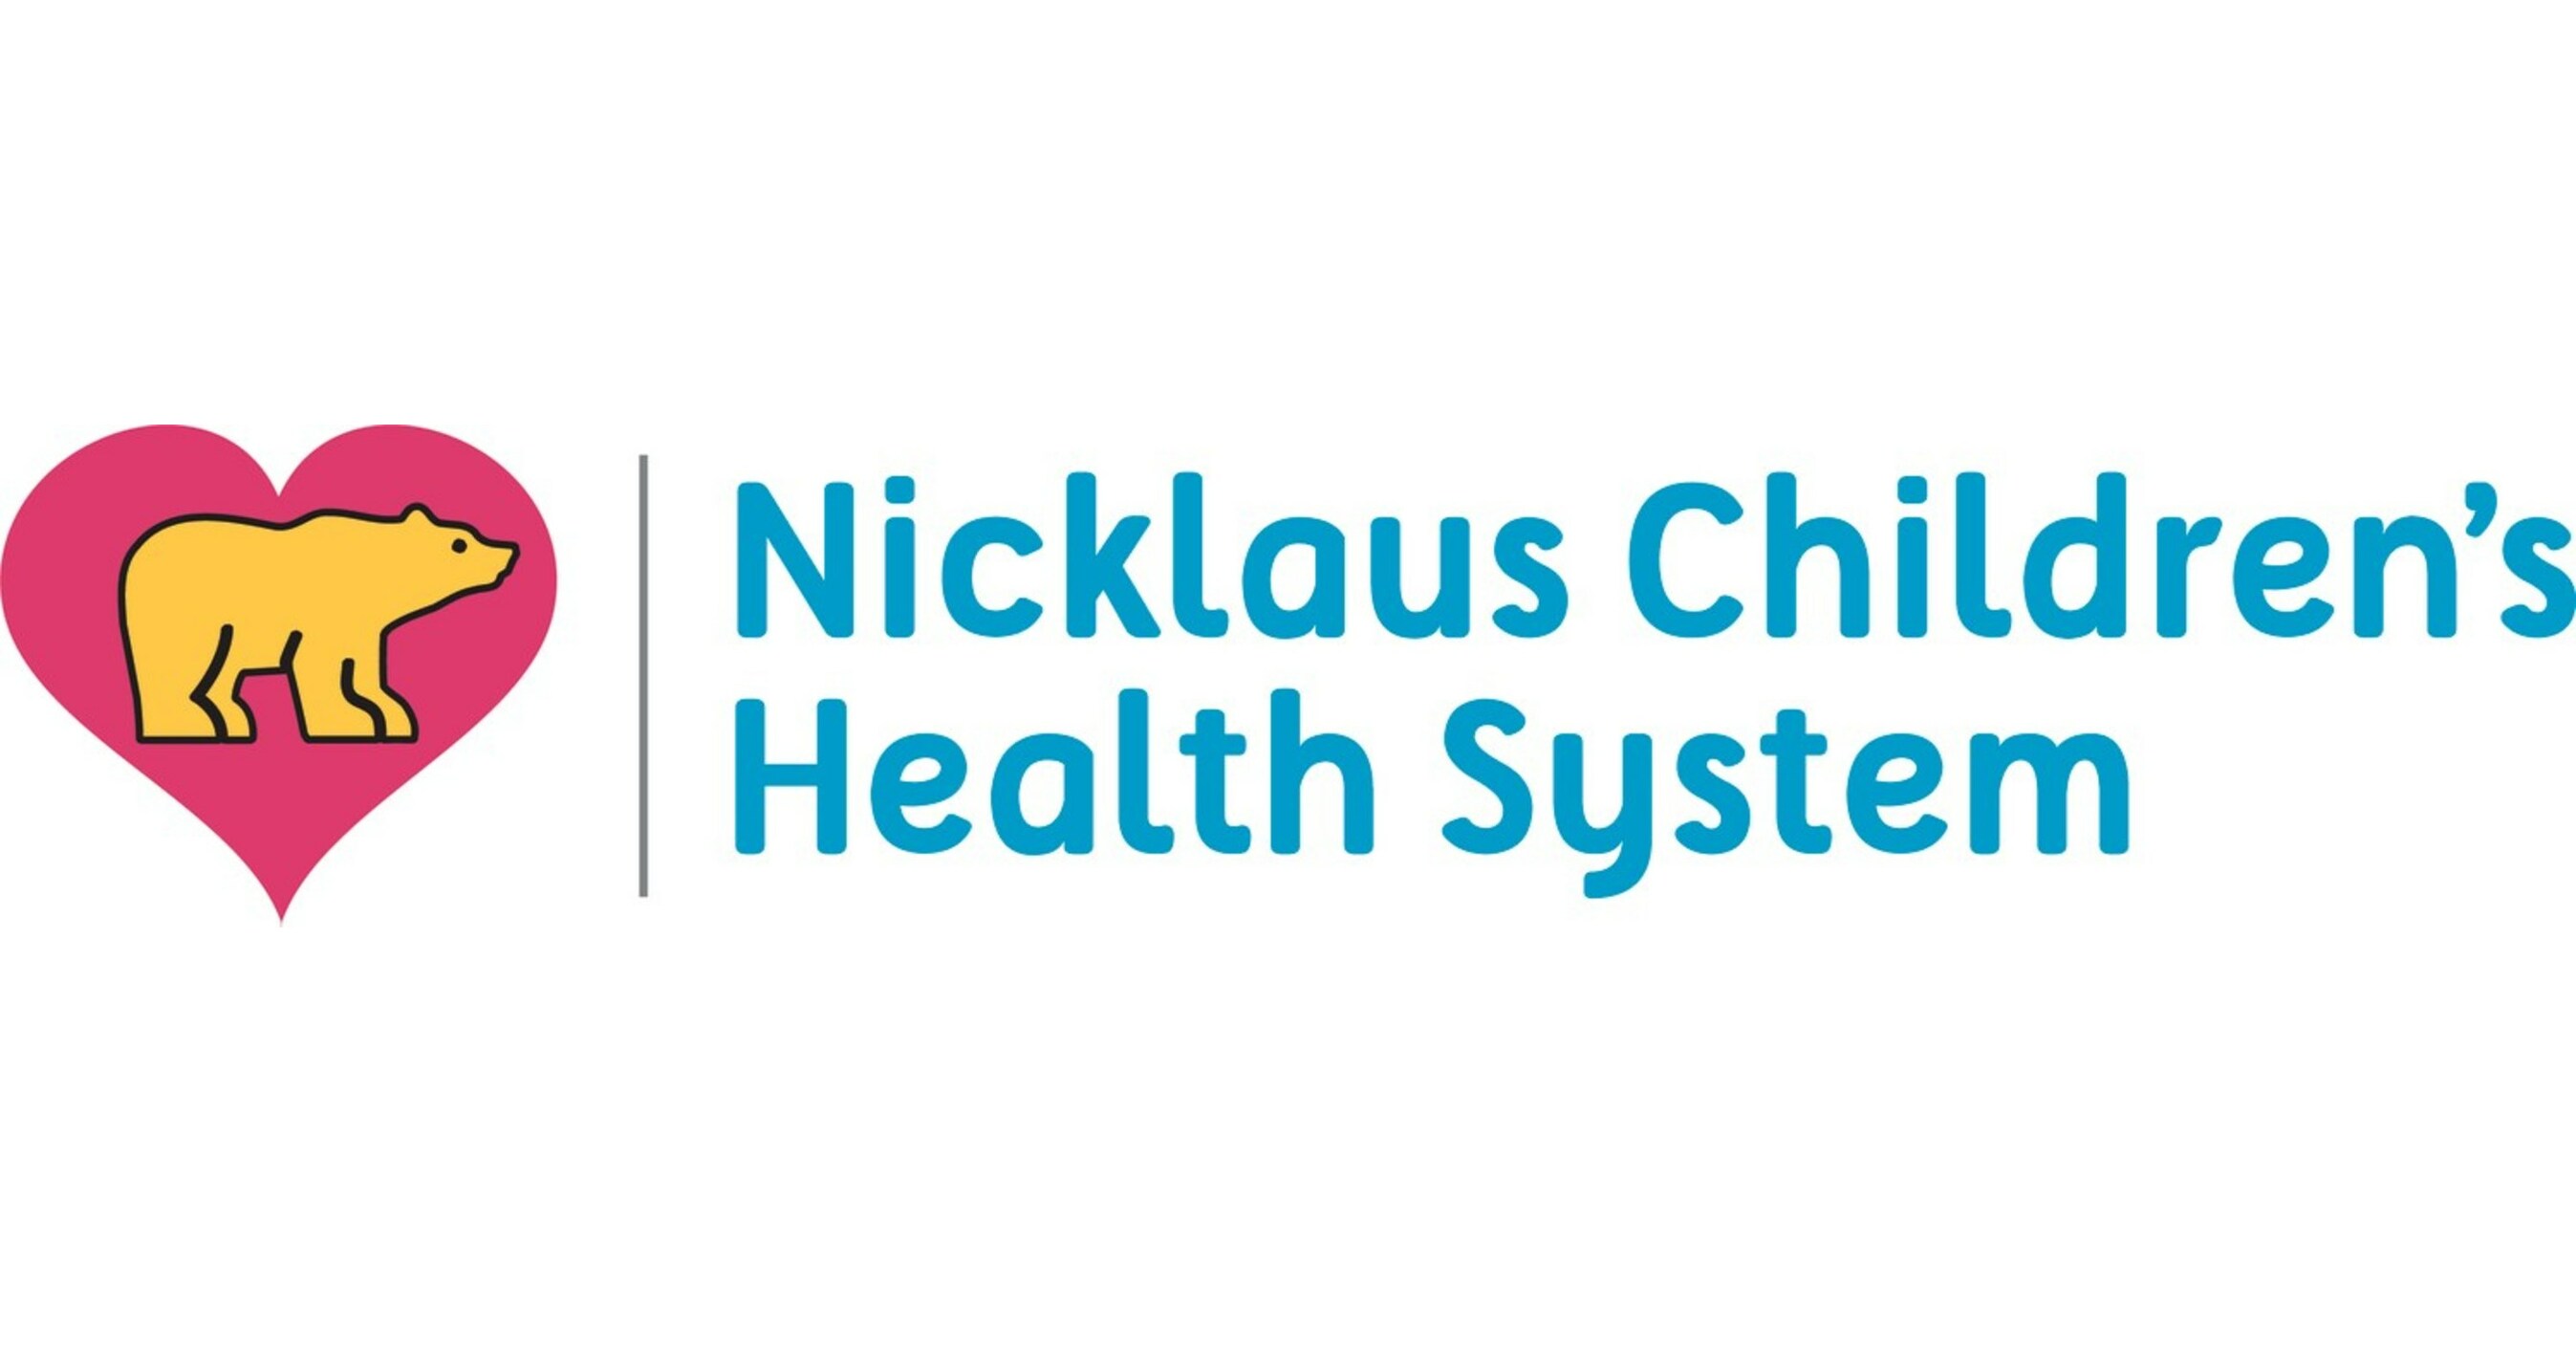 Nicklaus Children’s Health System receives improved and confirmed ratings from Fitch and Standard and Poor’s